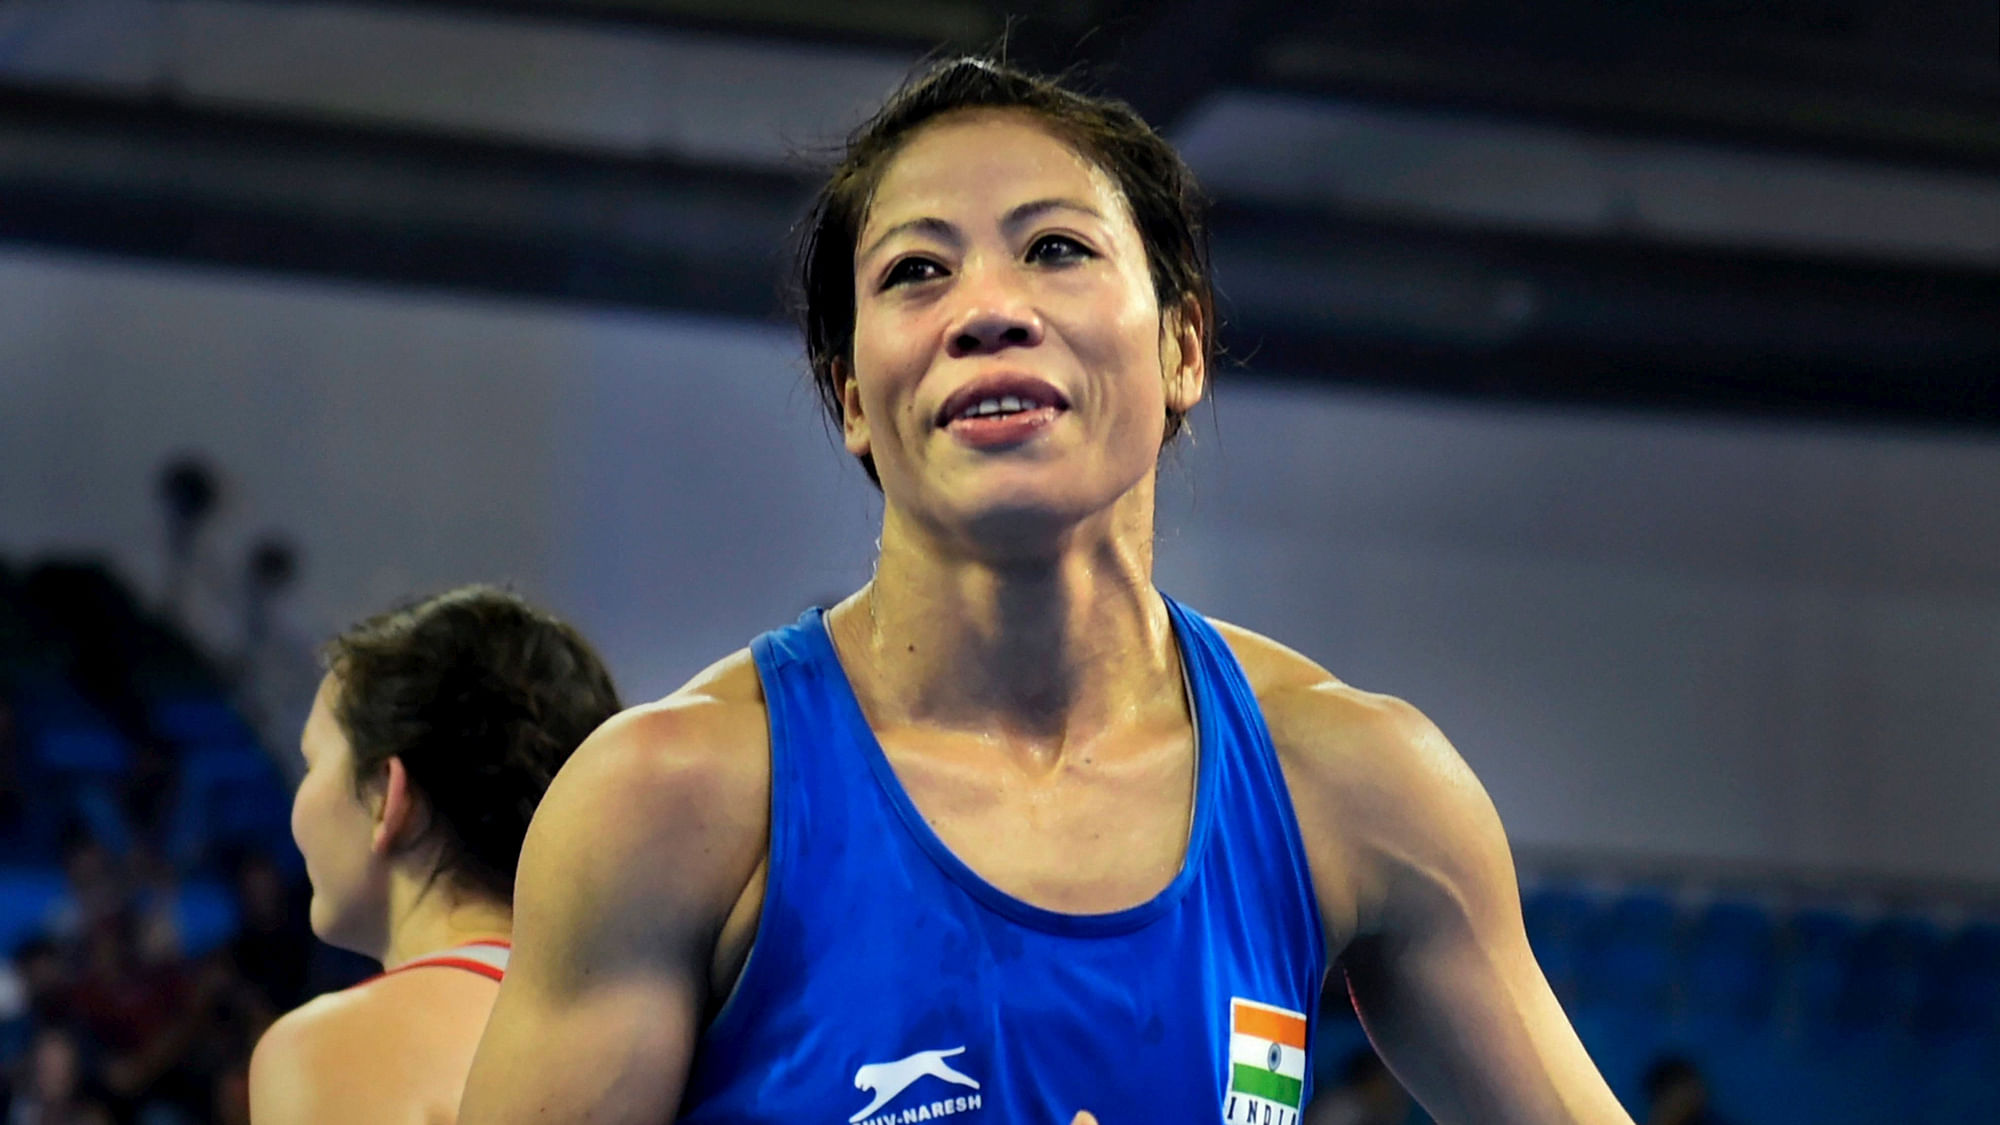 Mary Kom enters the semi-finals of the Women’s World Boxing Championships.